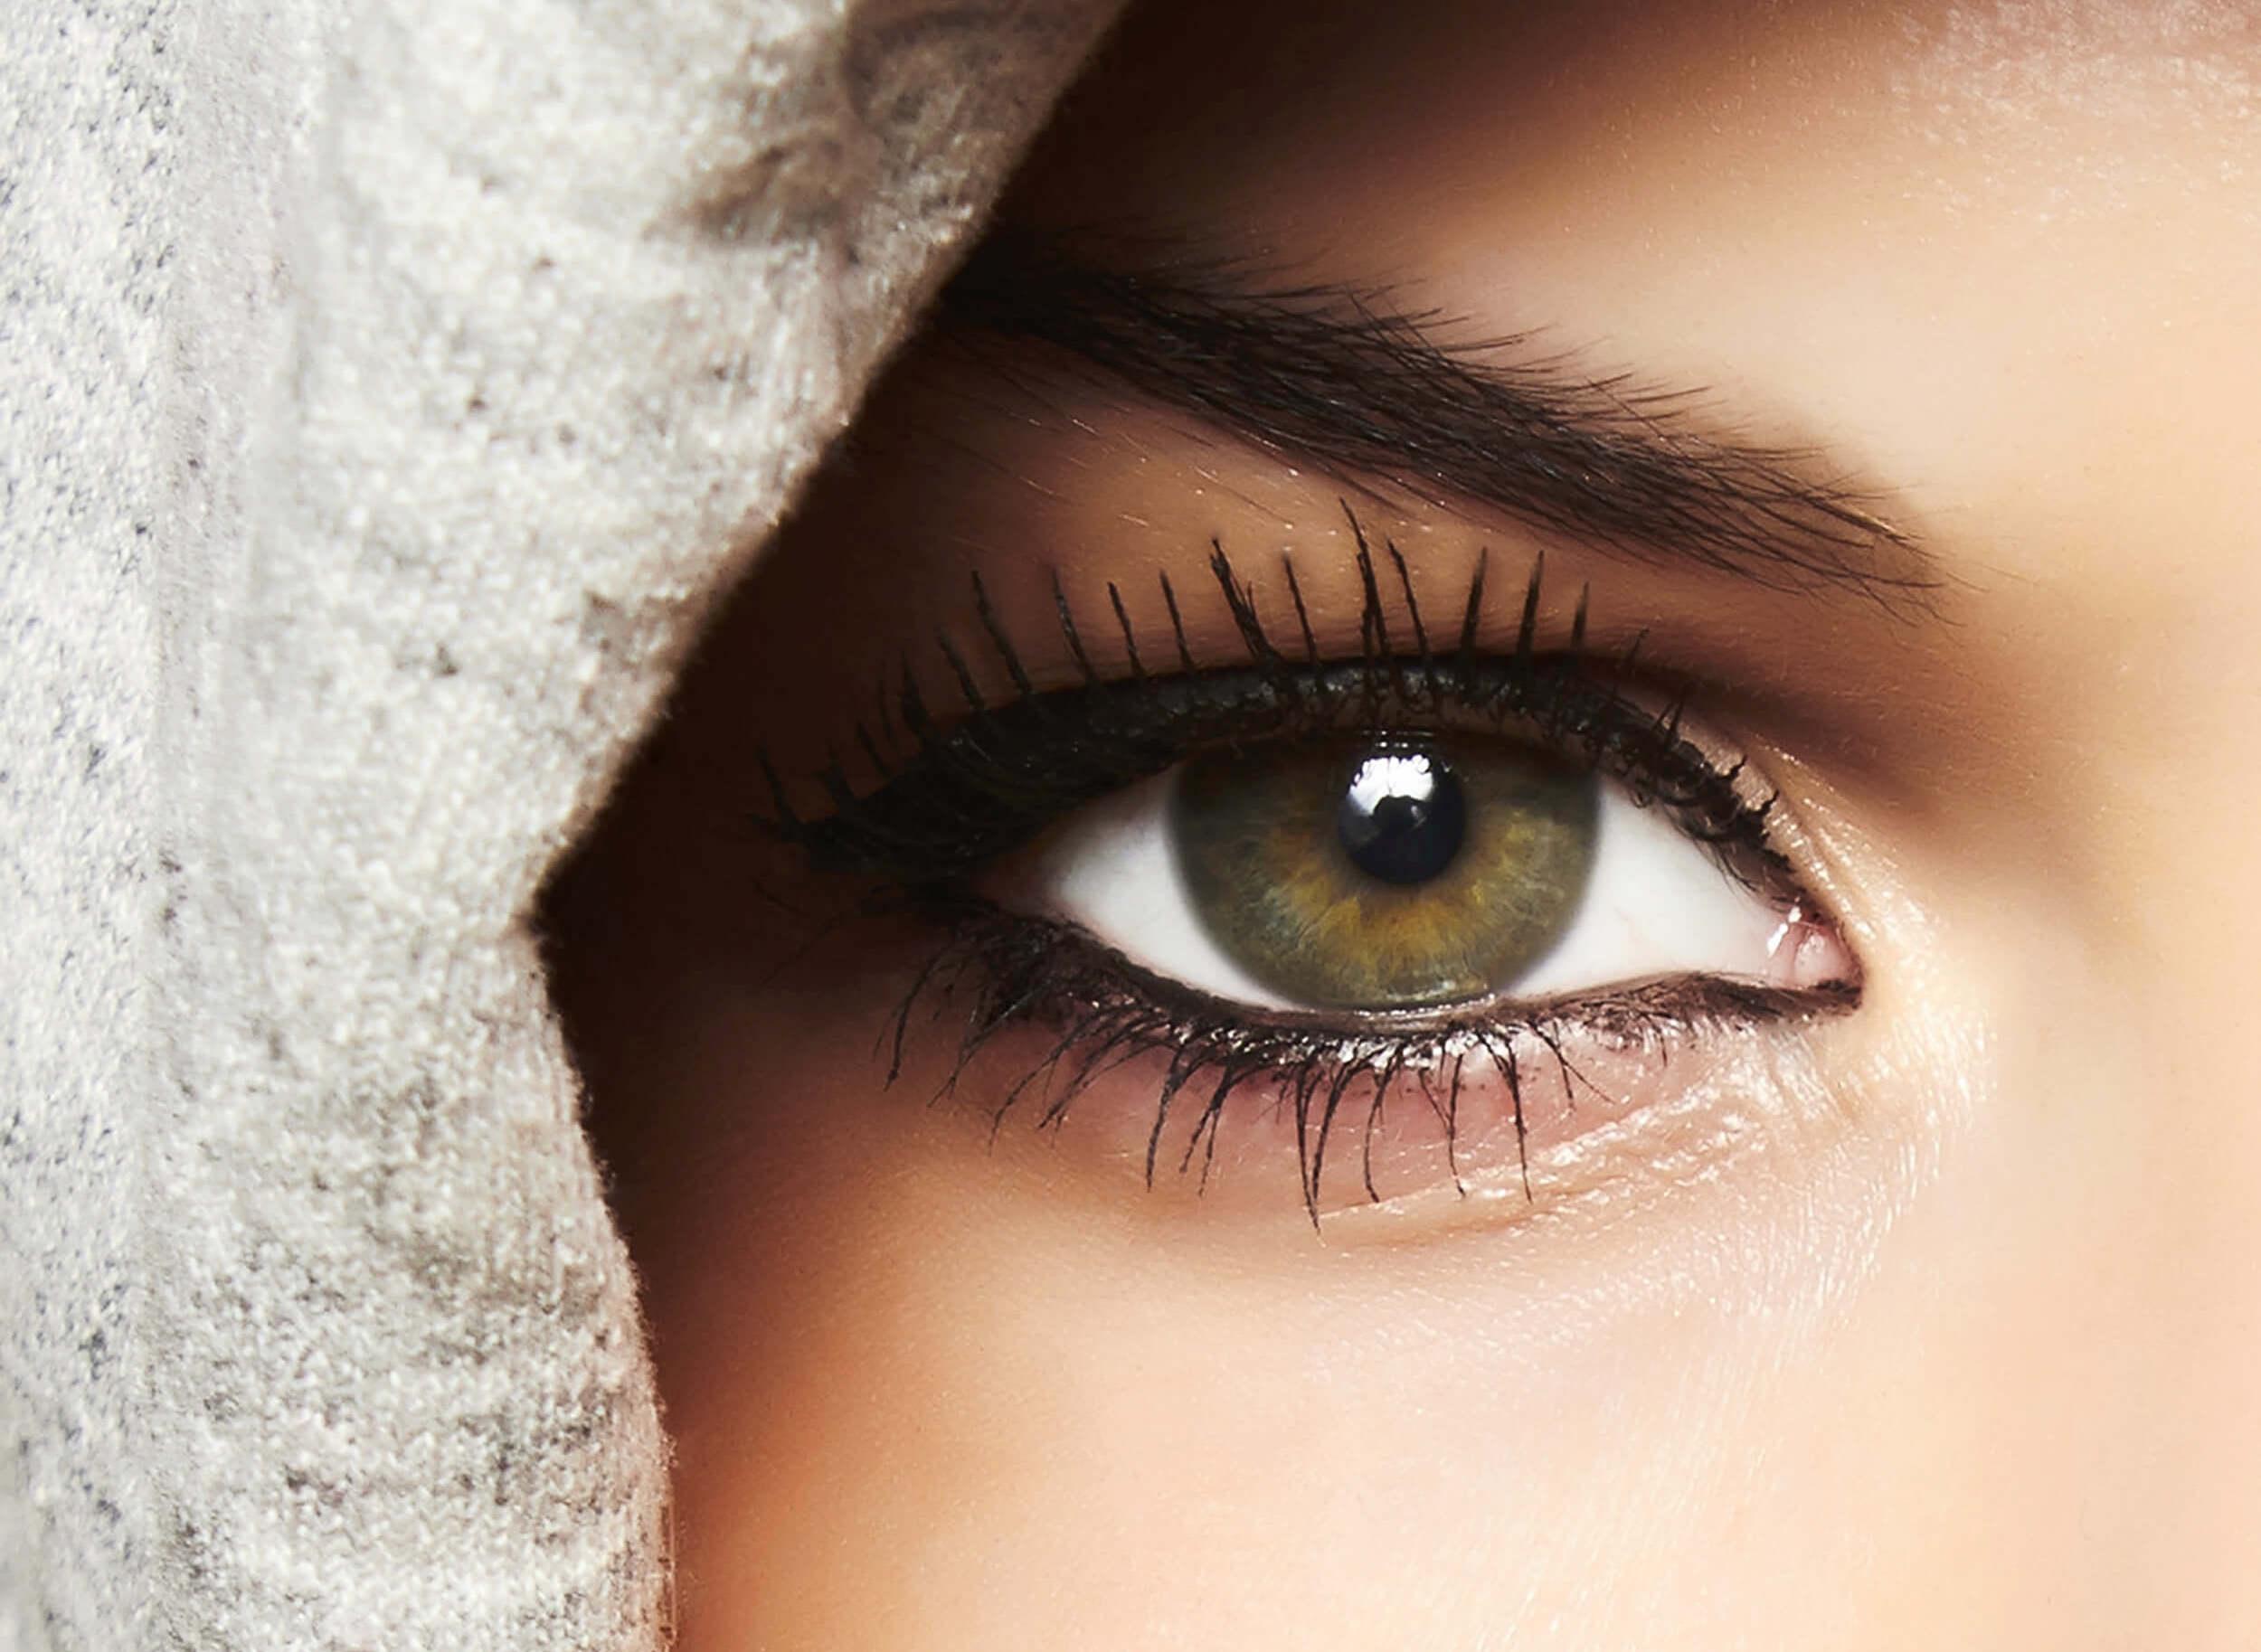 The Best Makeup Ideas for Hooded Eyes – The Value Place